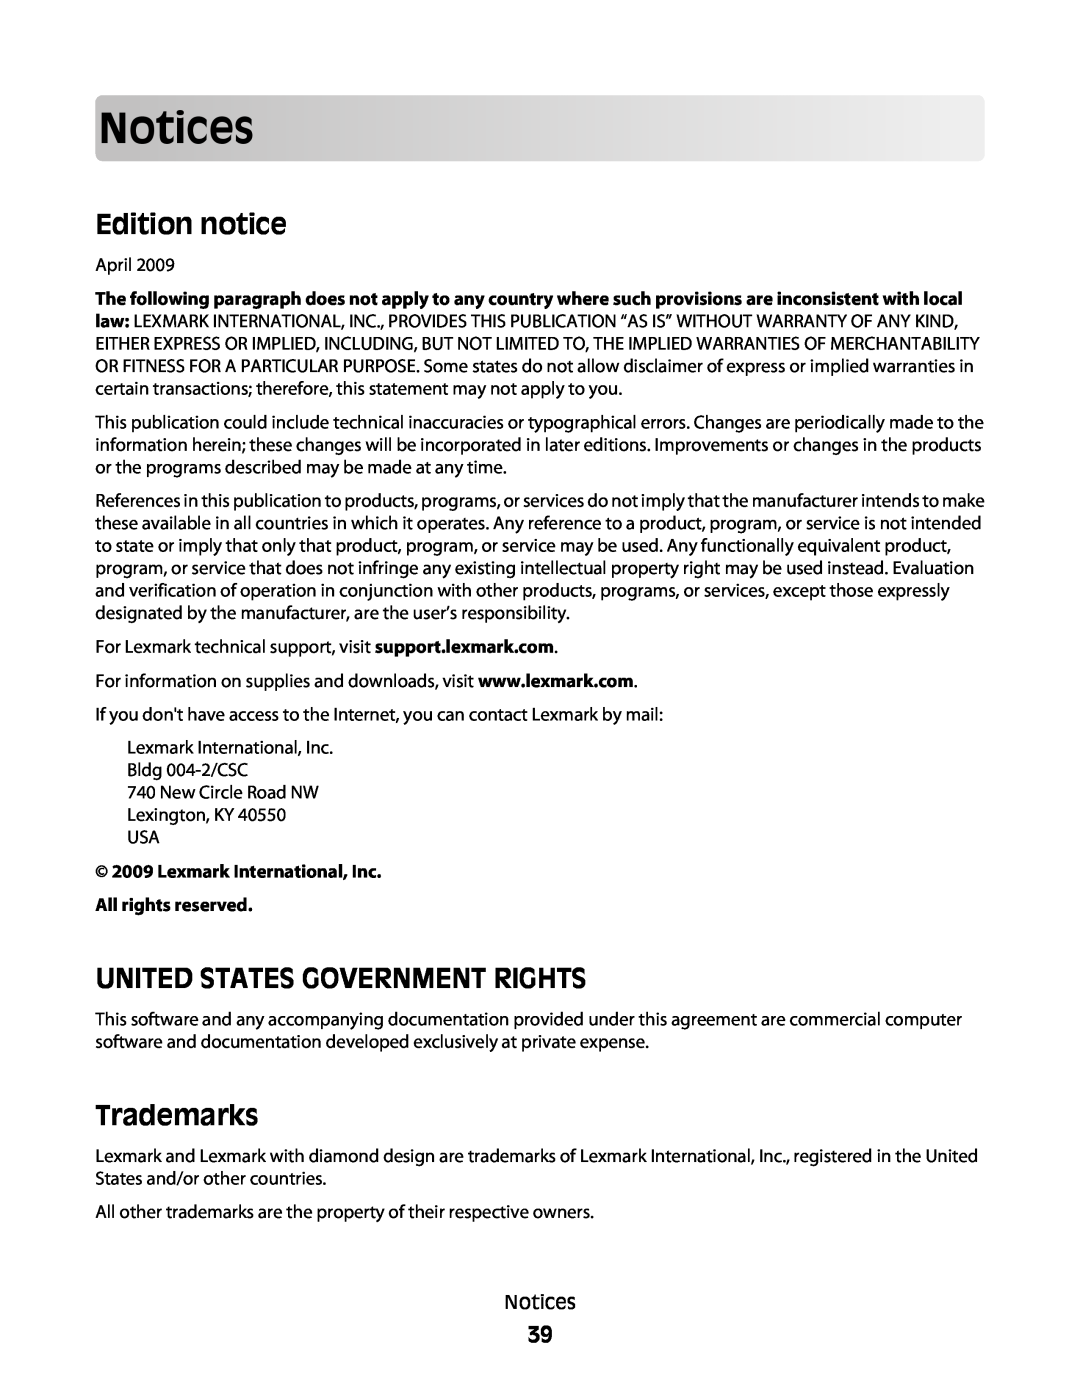 Lexmark S400 manual Notices, Edition notice, United States Government Rights, Trademarks 